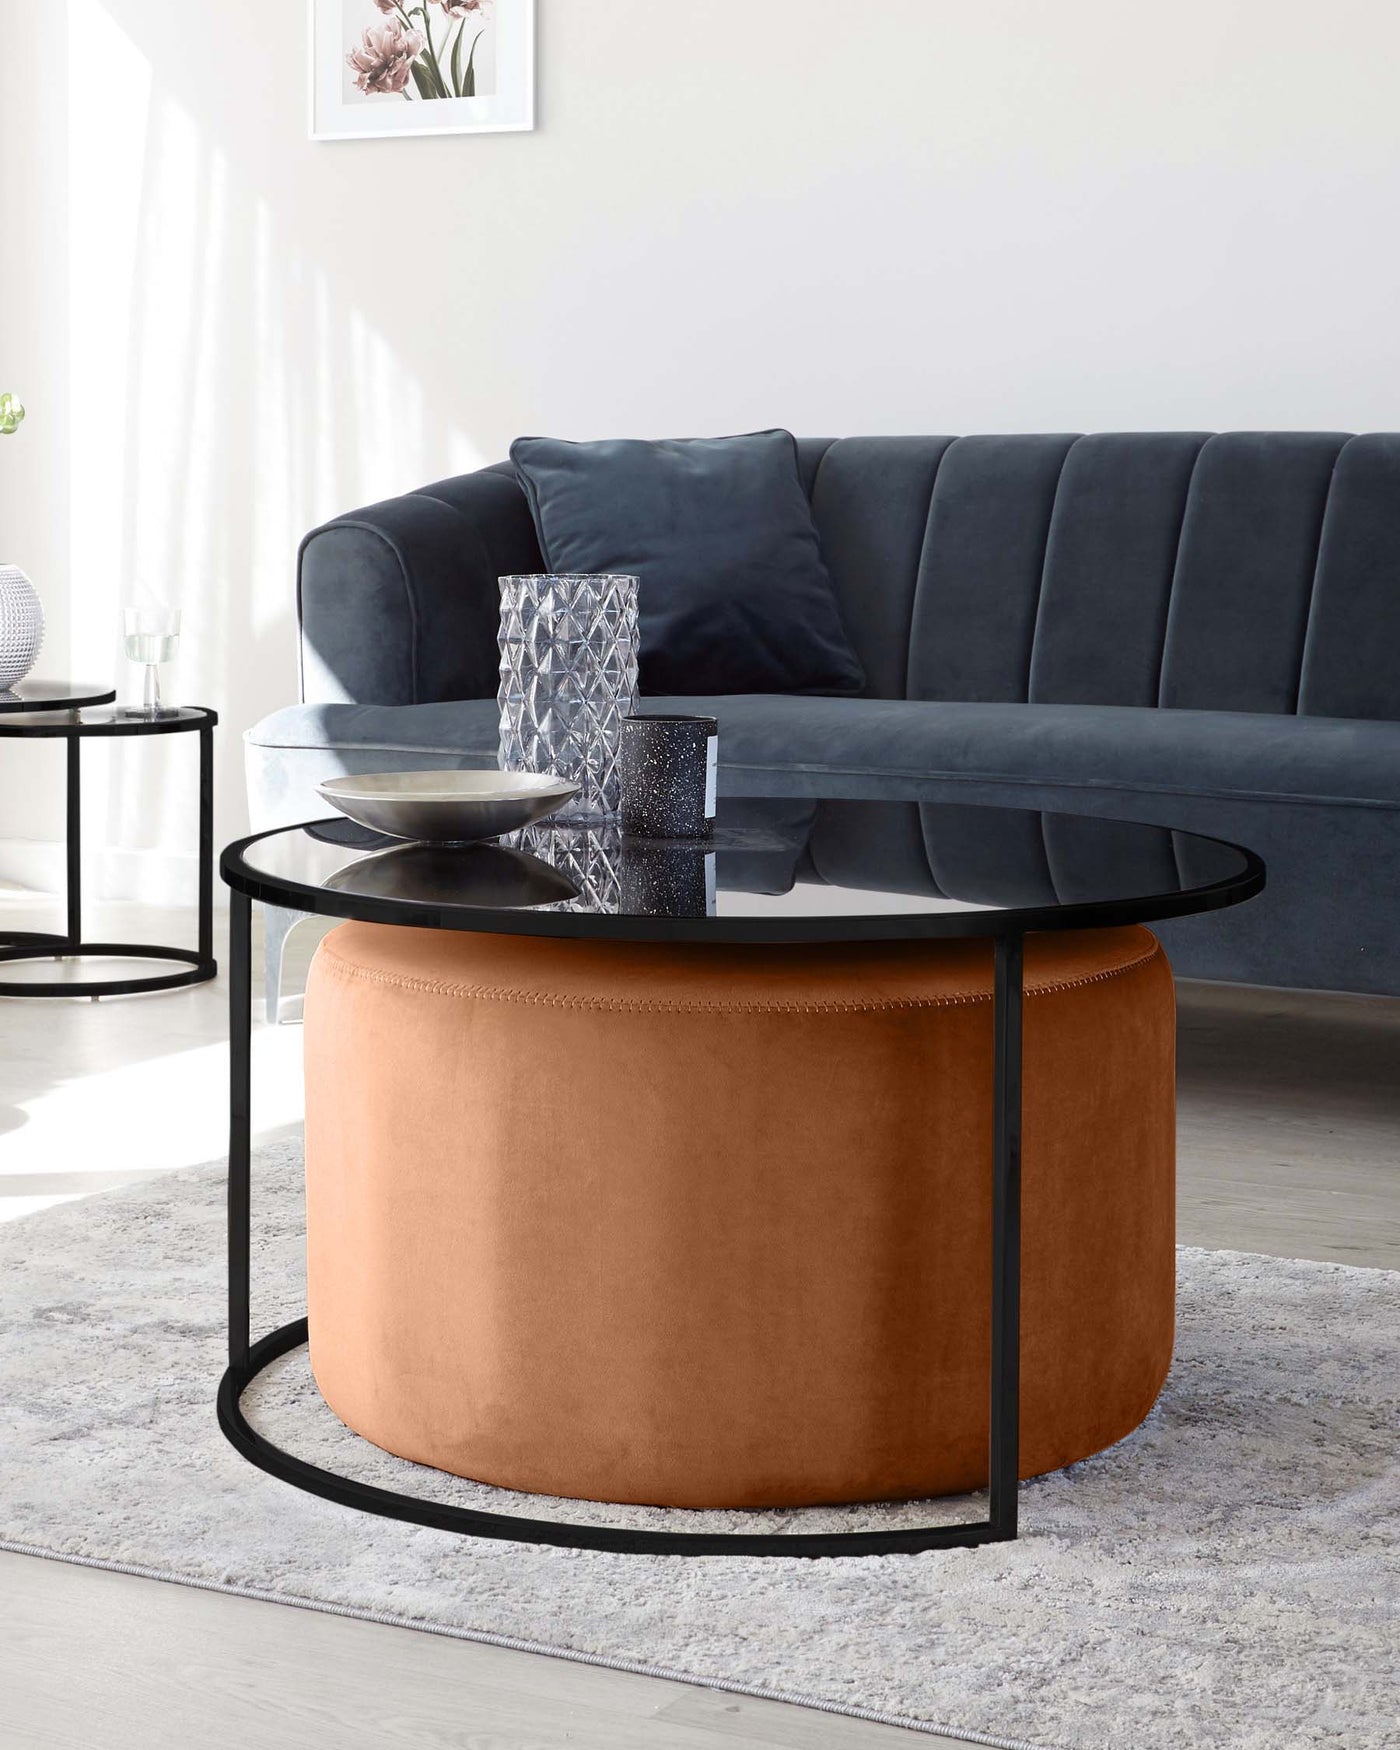 Thea Black Round Coffee Table & Rust Pouffe